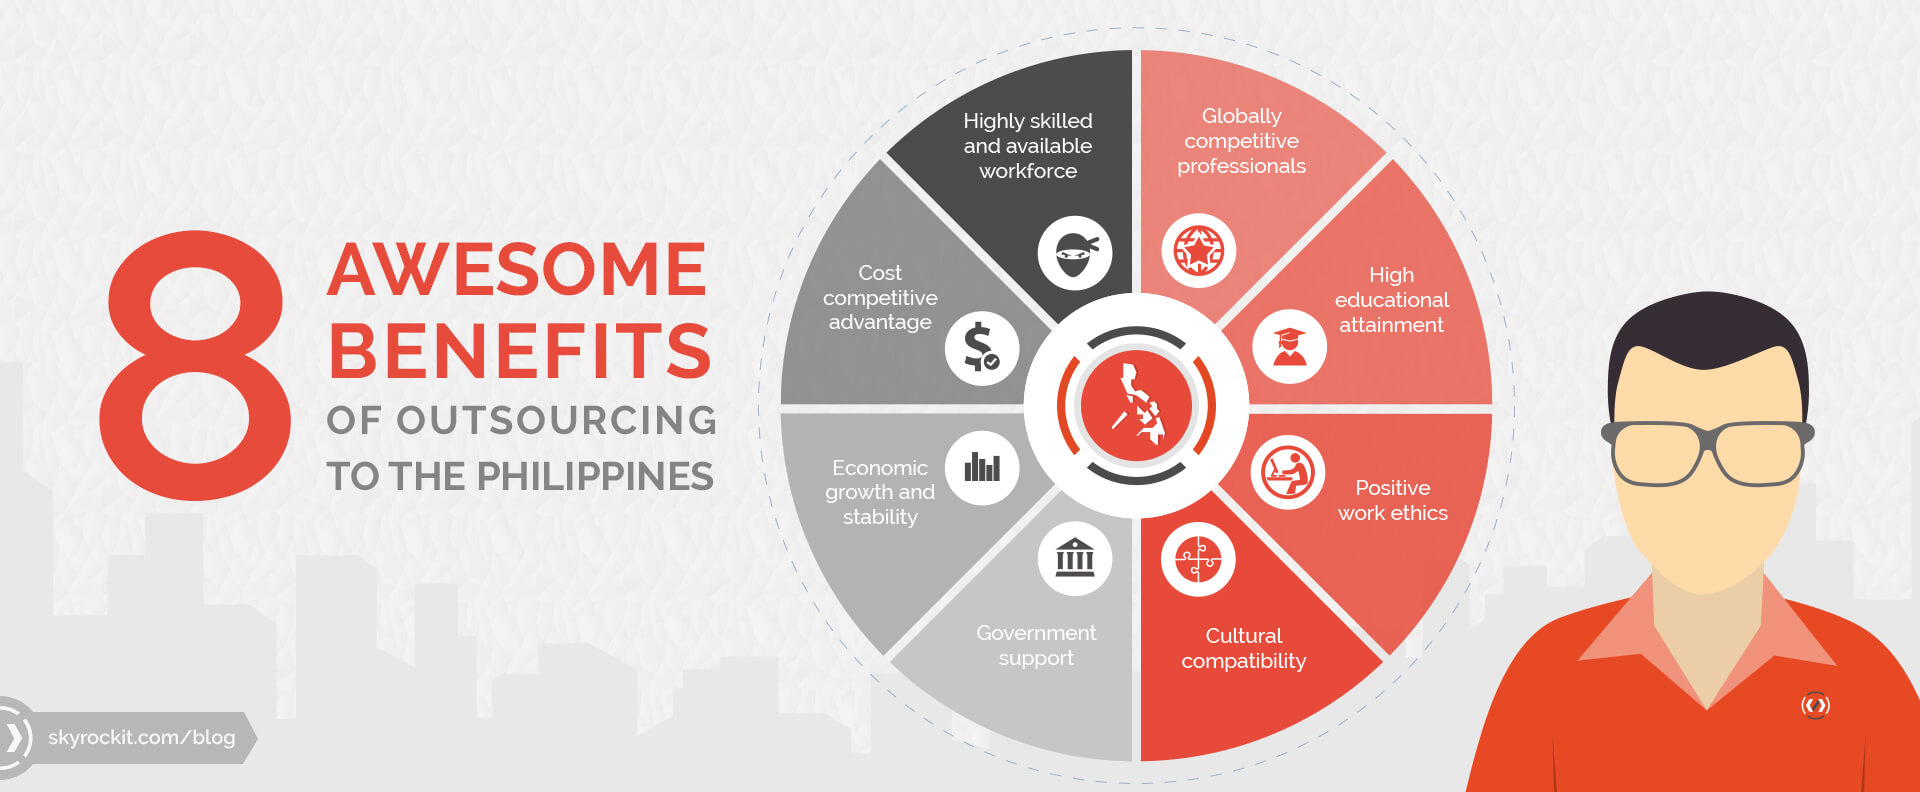 8 Benefits Of Outsourcing To The Philippines Compliant Business Processing